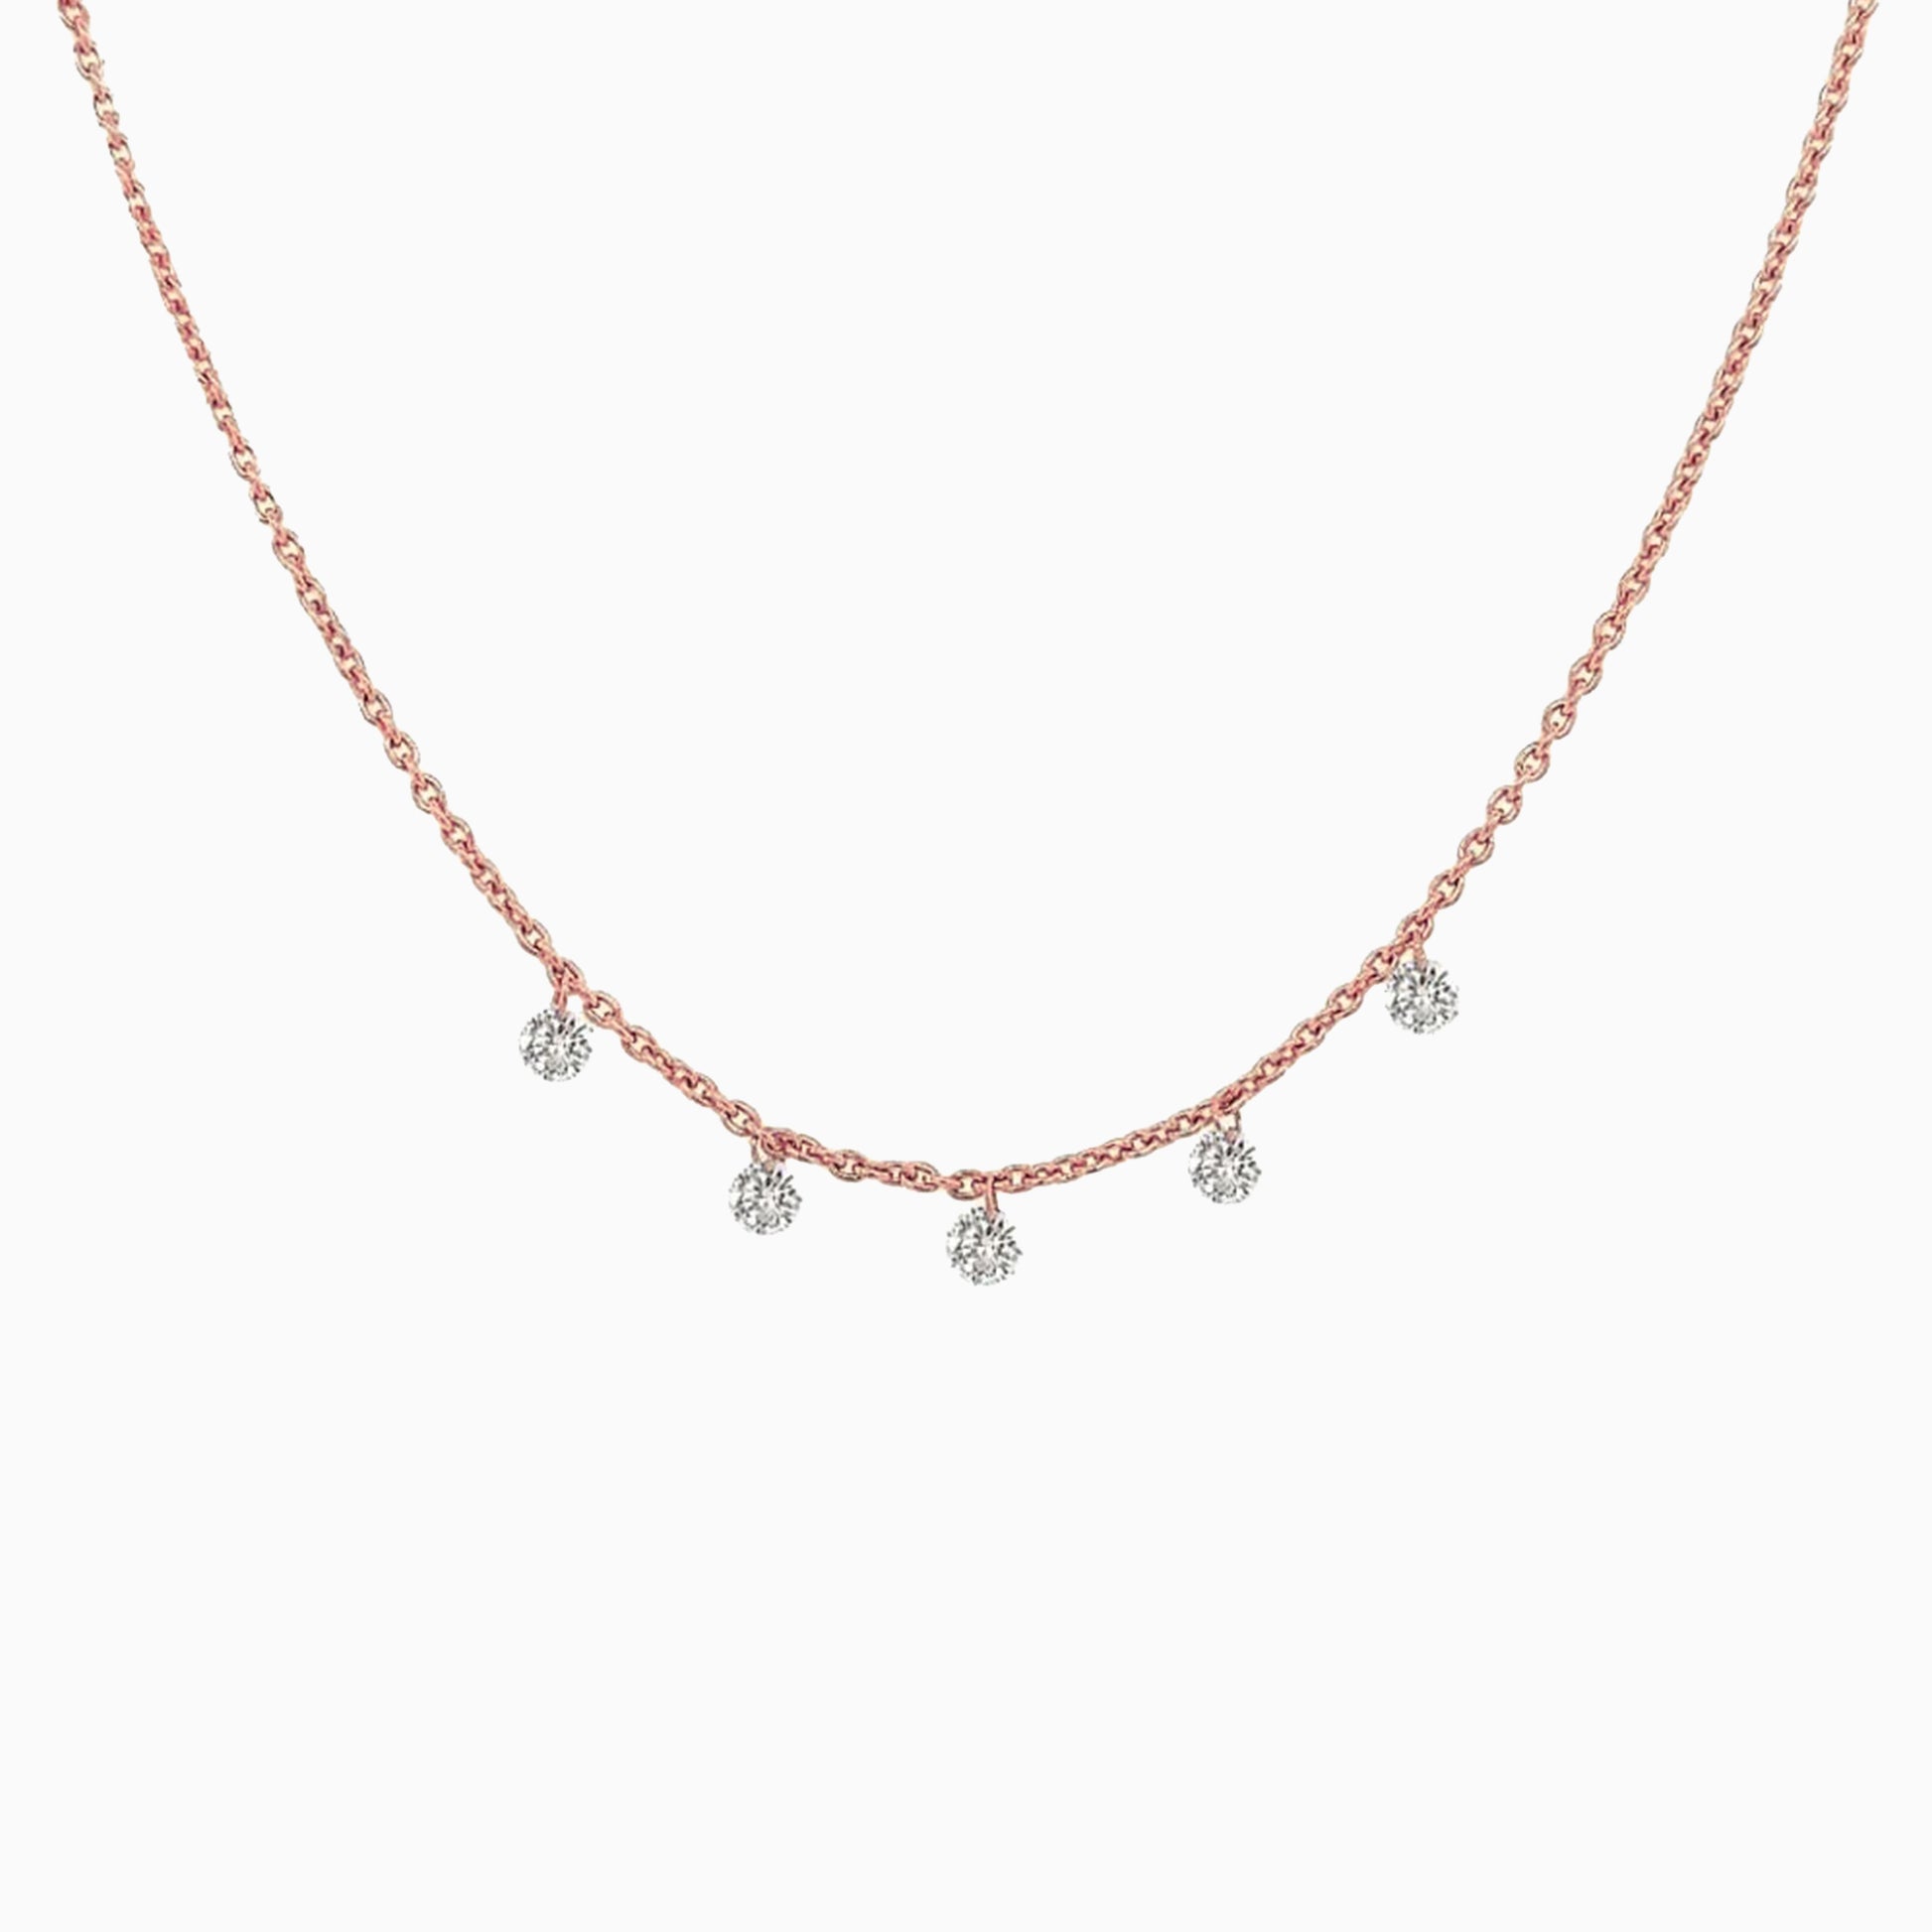 Floating Five Diamond Necklace in Rose Gold on a white background